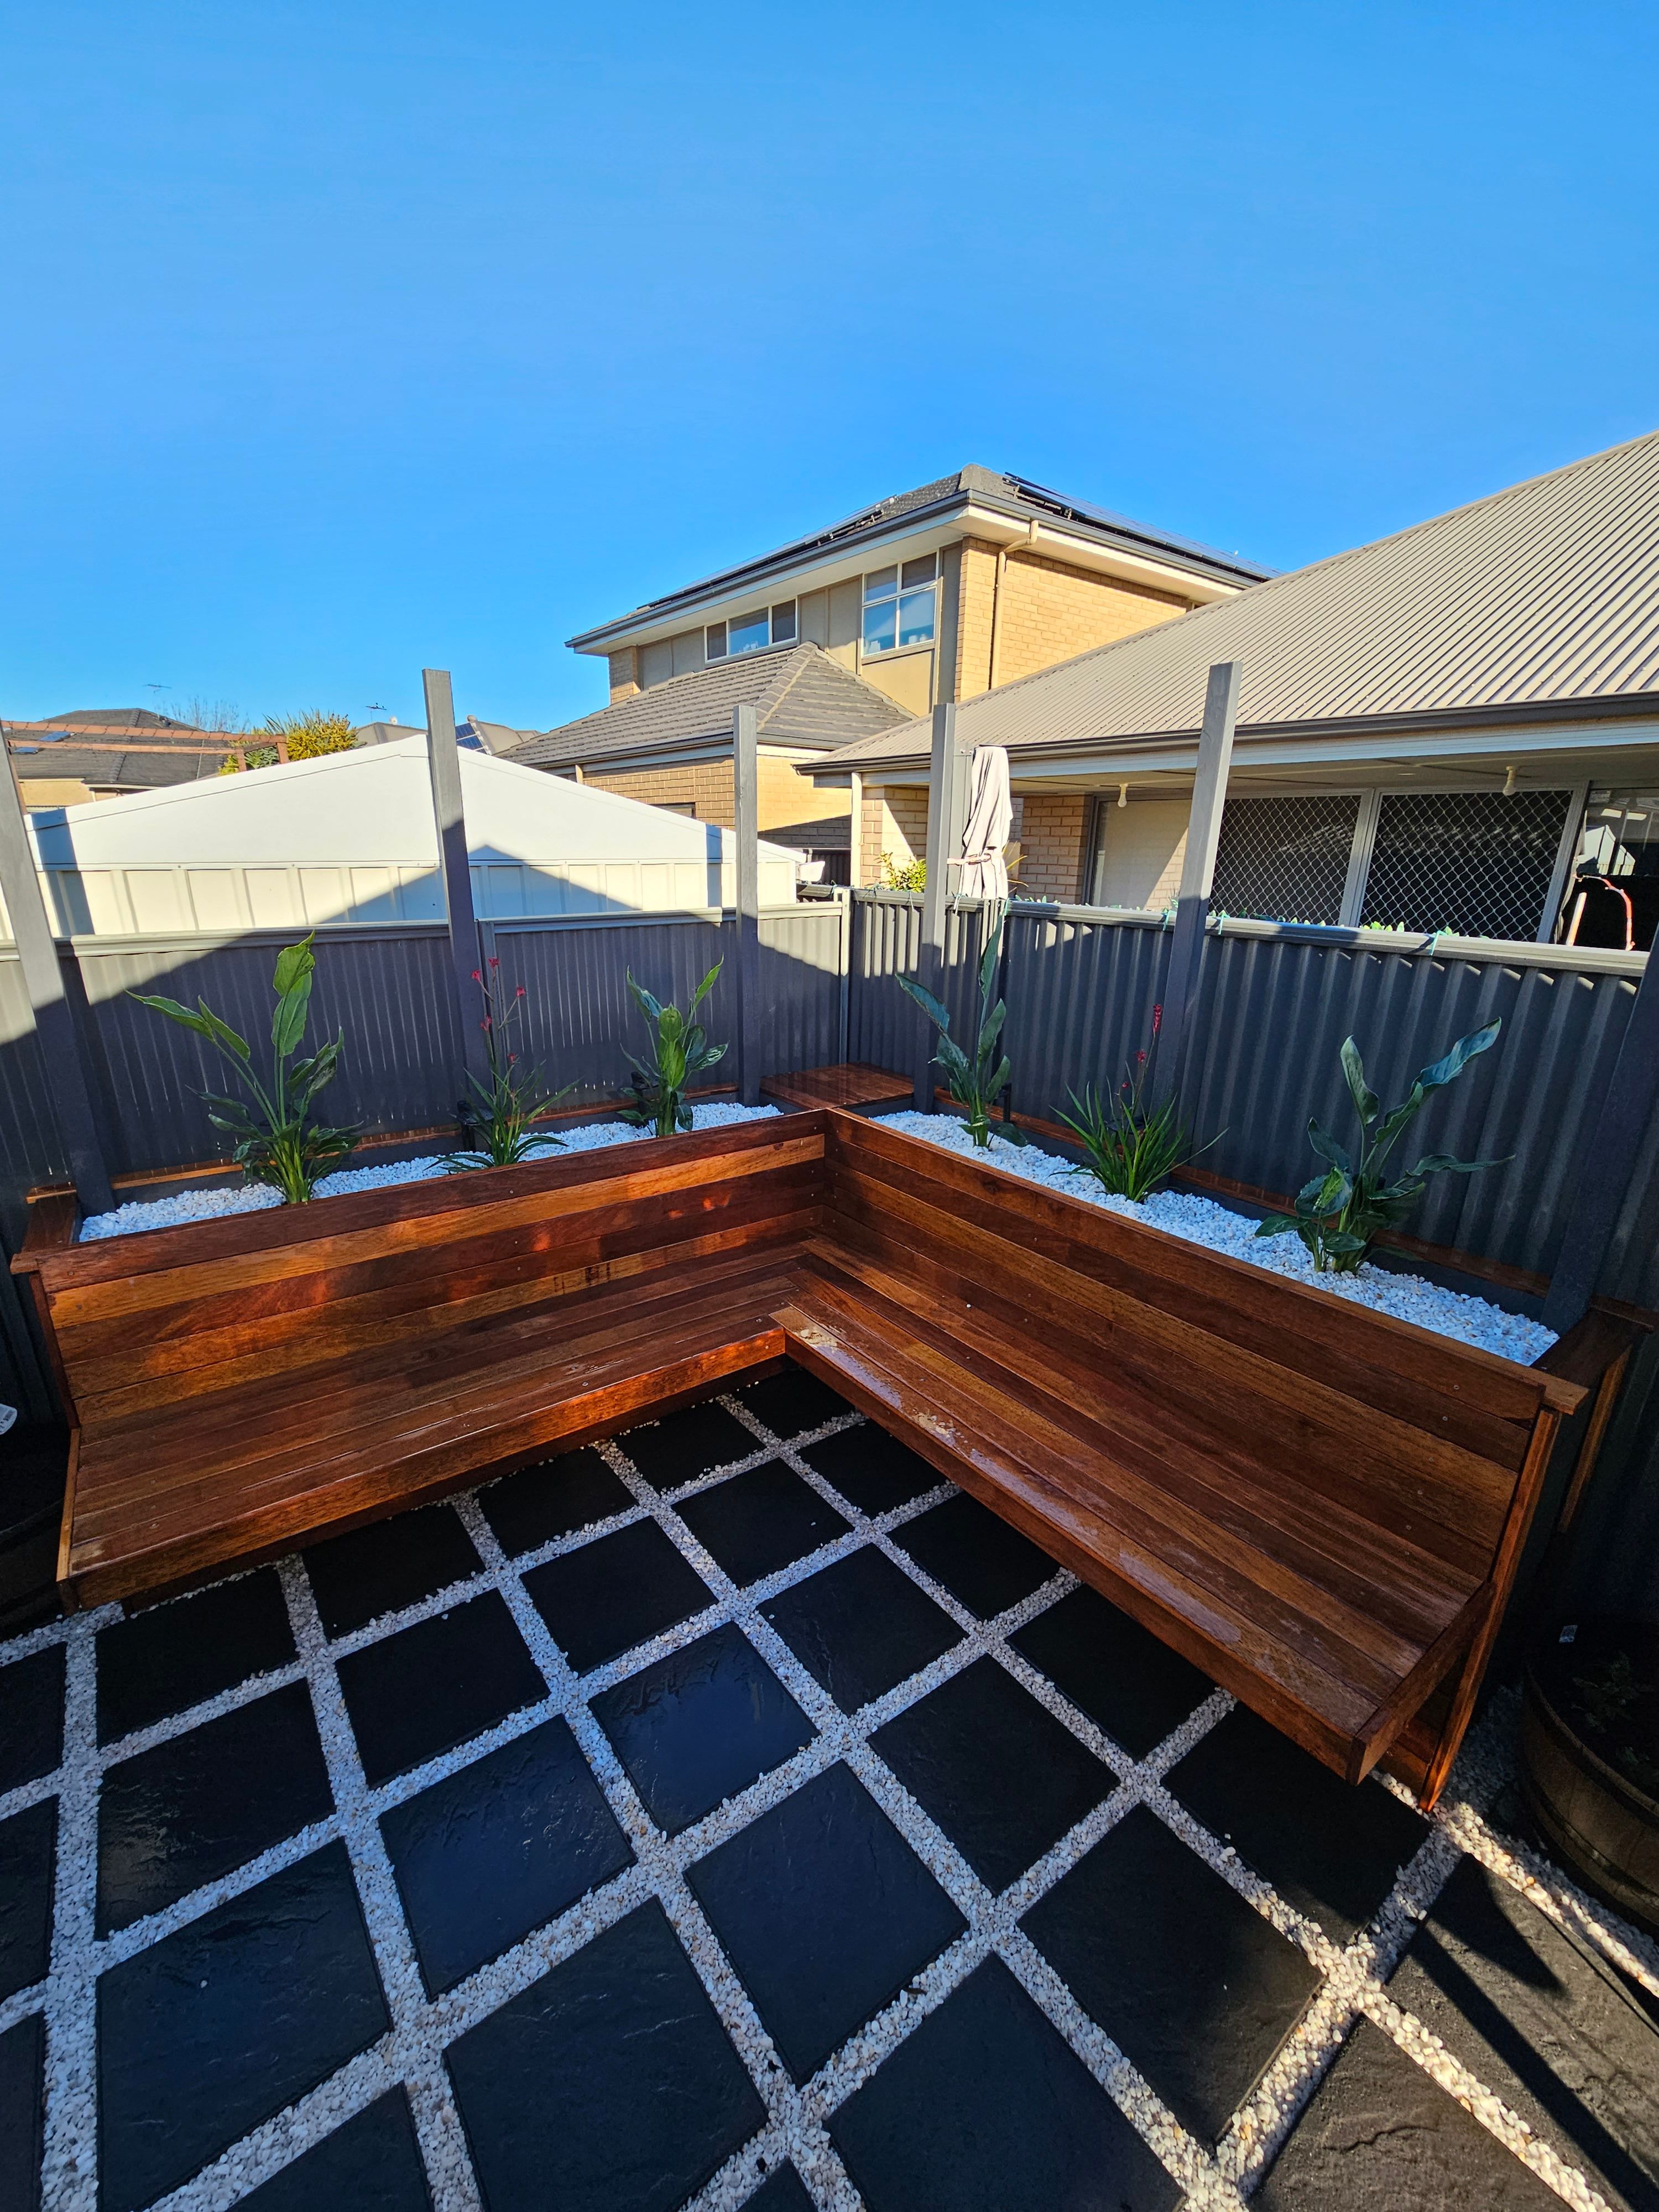 Outdoor entertaining area with fire pit | Bunnings Workshop community